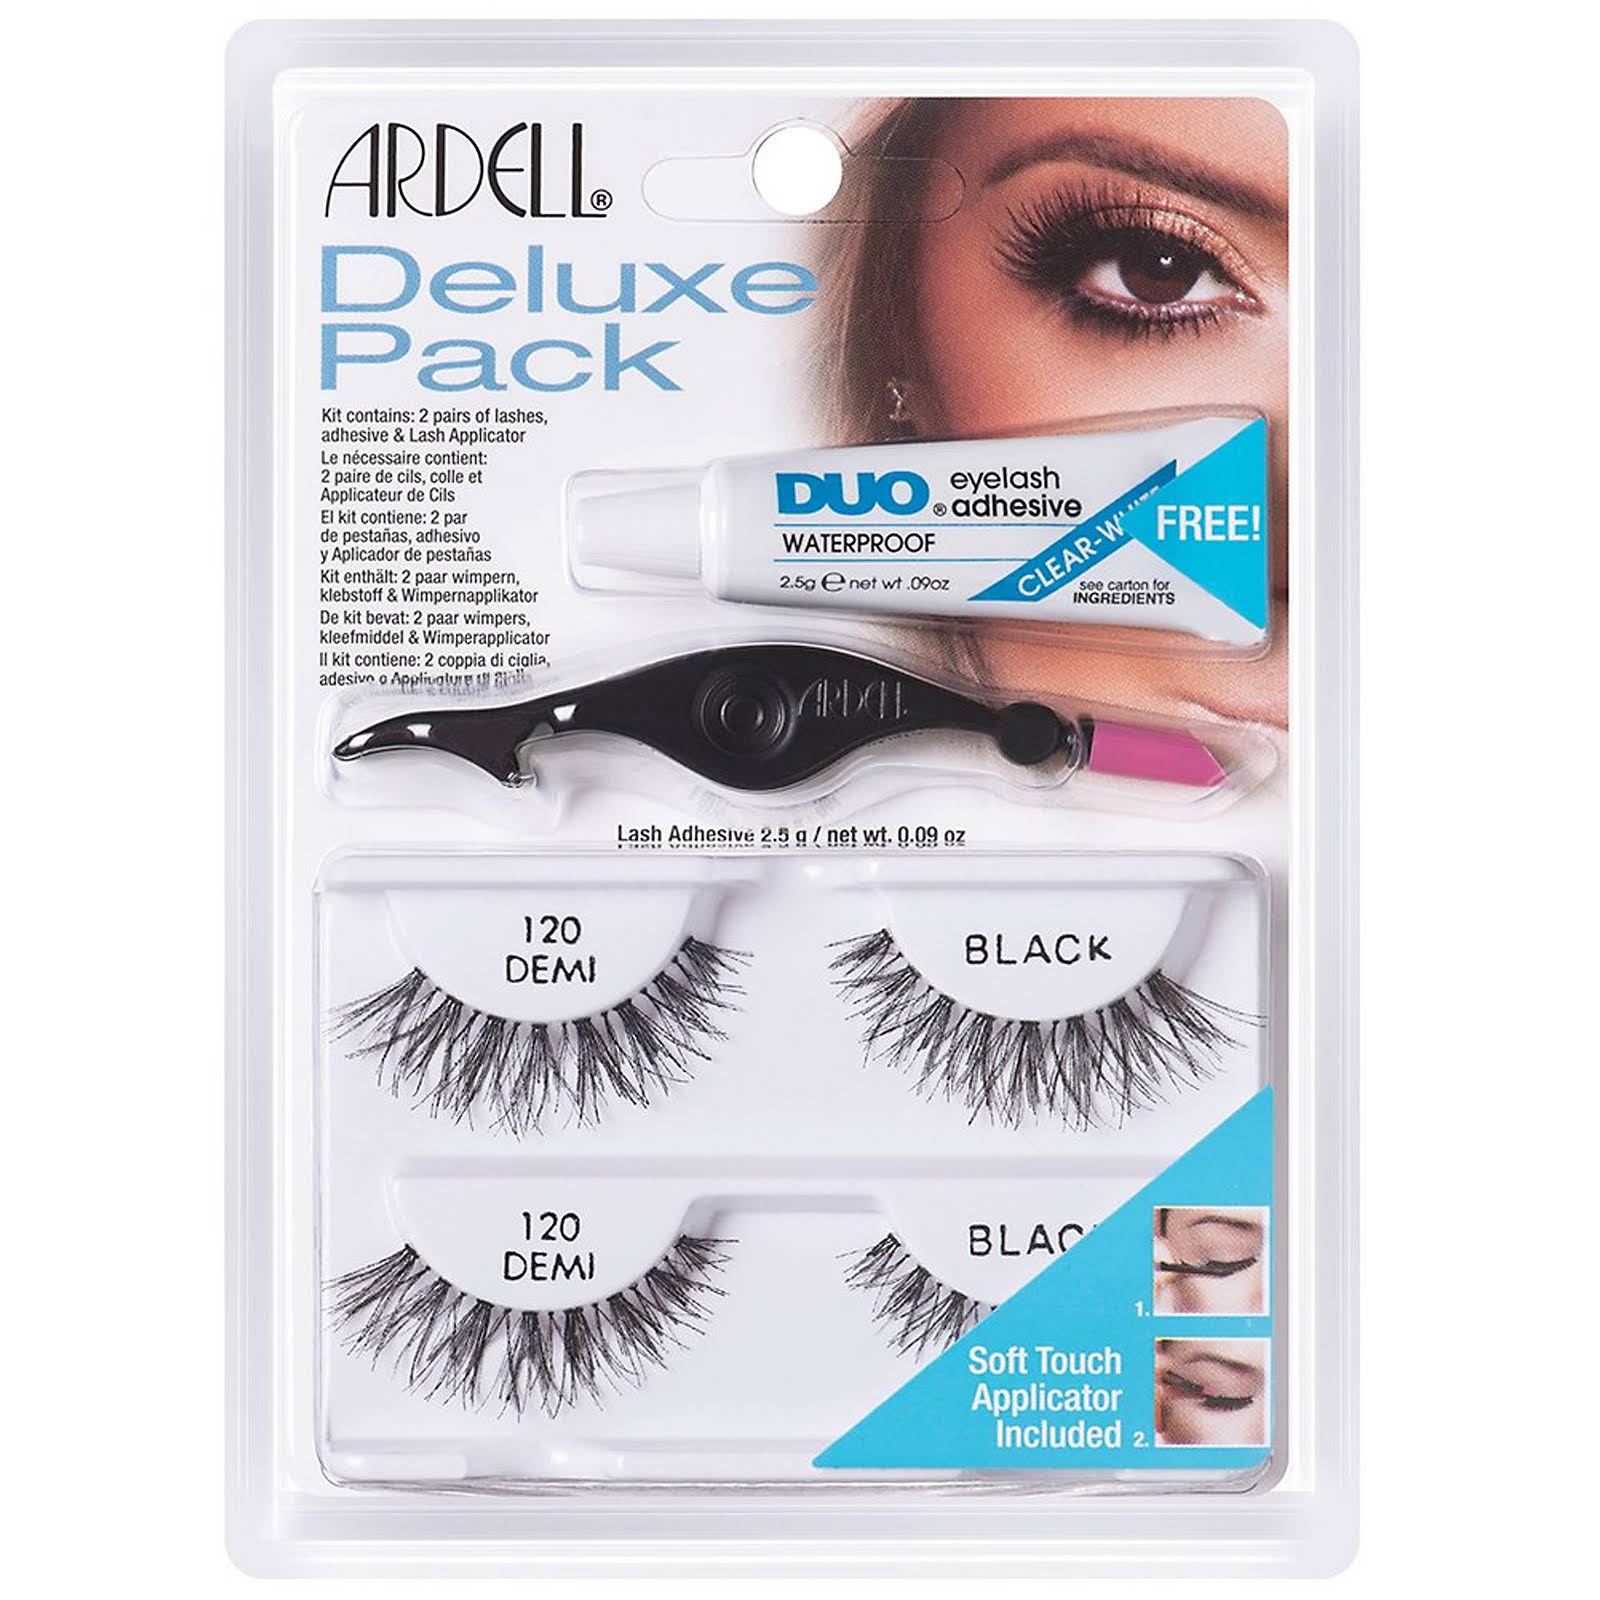 Ardell Deluxe Pack Lashes - with Adhesive, 105 Black